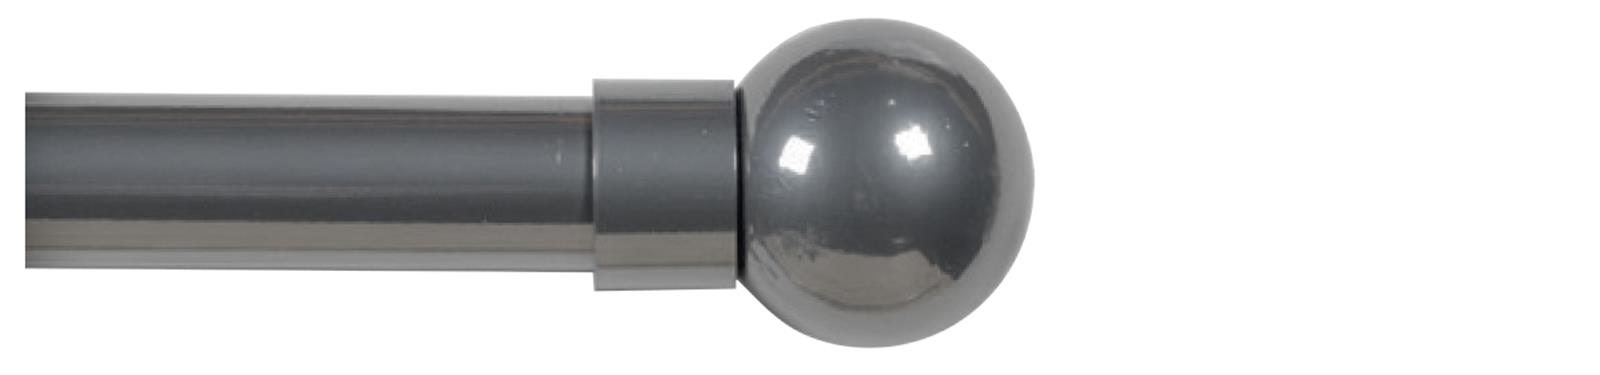 Cameron Fuller 32mm Metal Curtain Pole Pewter Ball